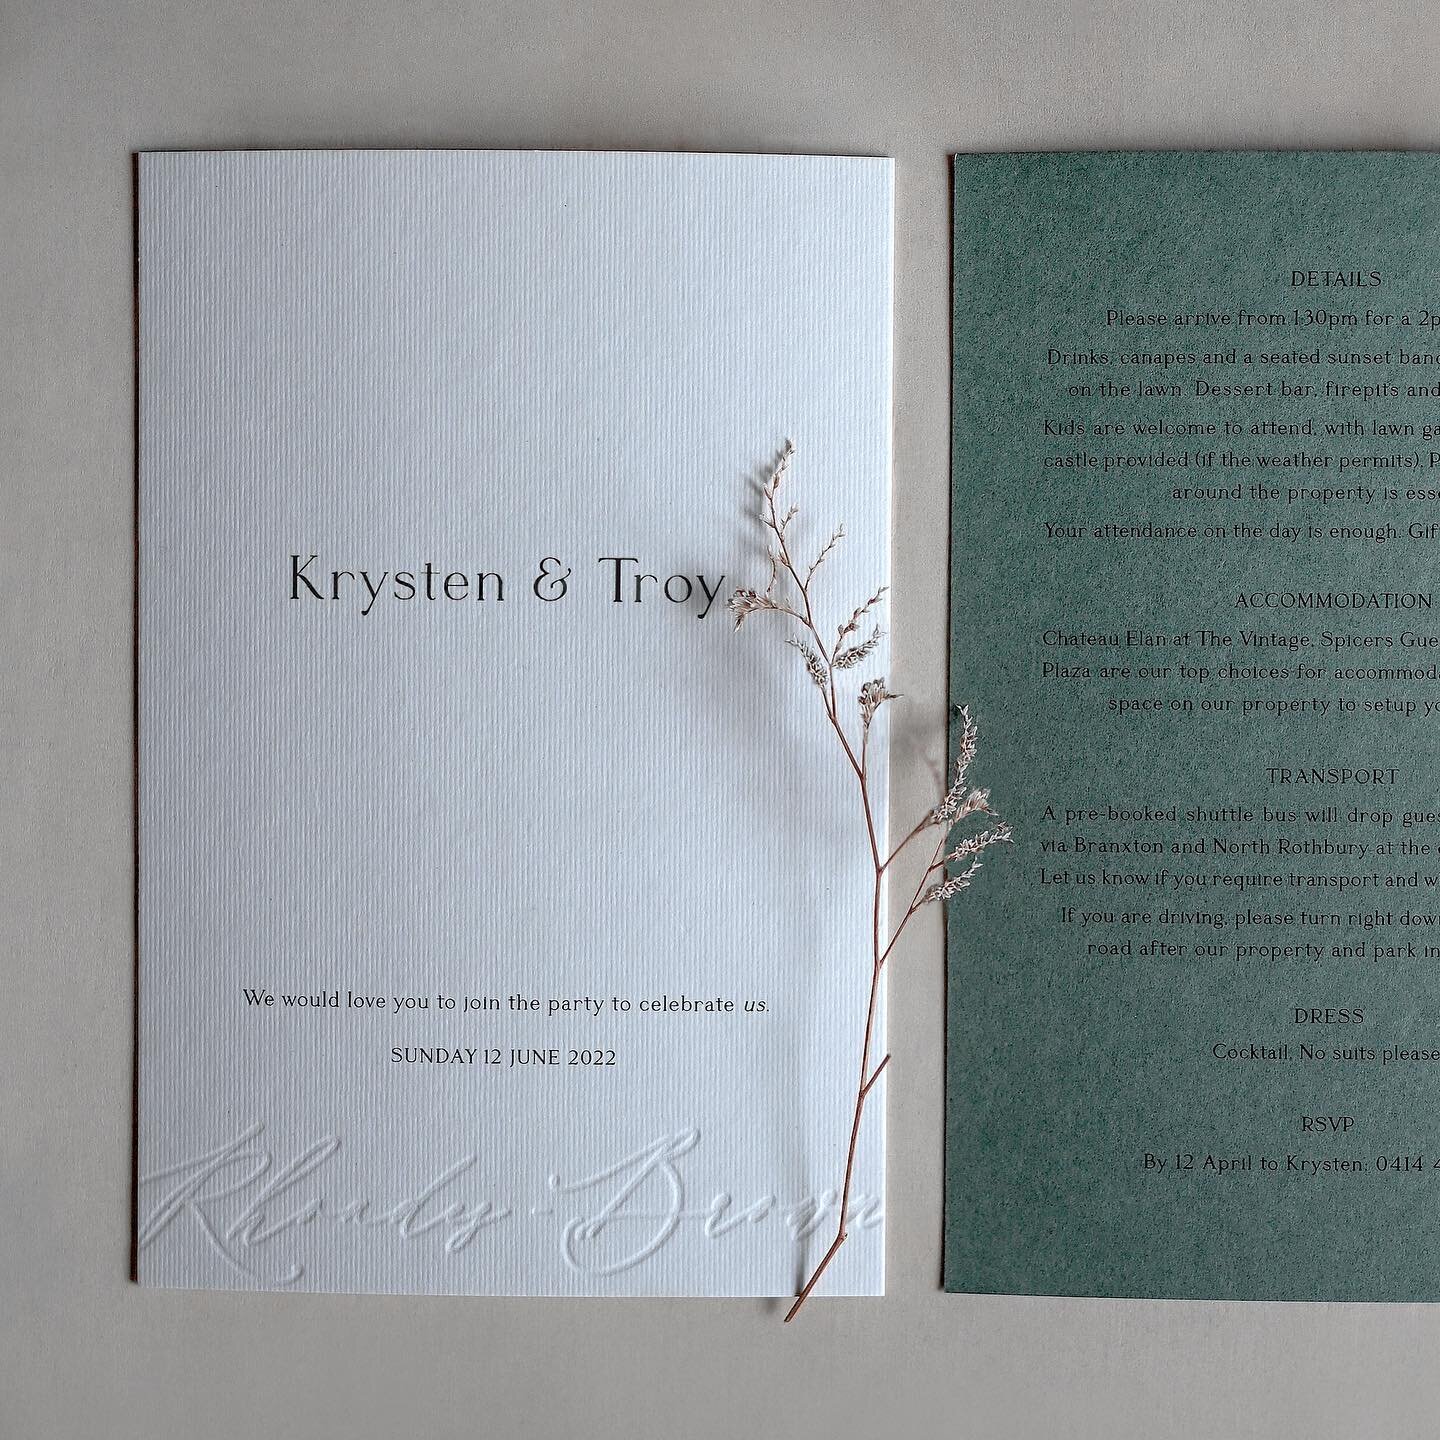 Designing my own wedding invitation was surprisingly easier than I expected.

The design had to represent us, our home where we were married and, of course, it had to reflect my design style. 

The result: a clean, uncluttered invitation with a simpl